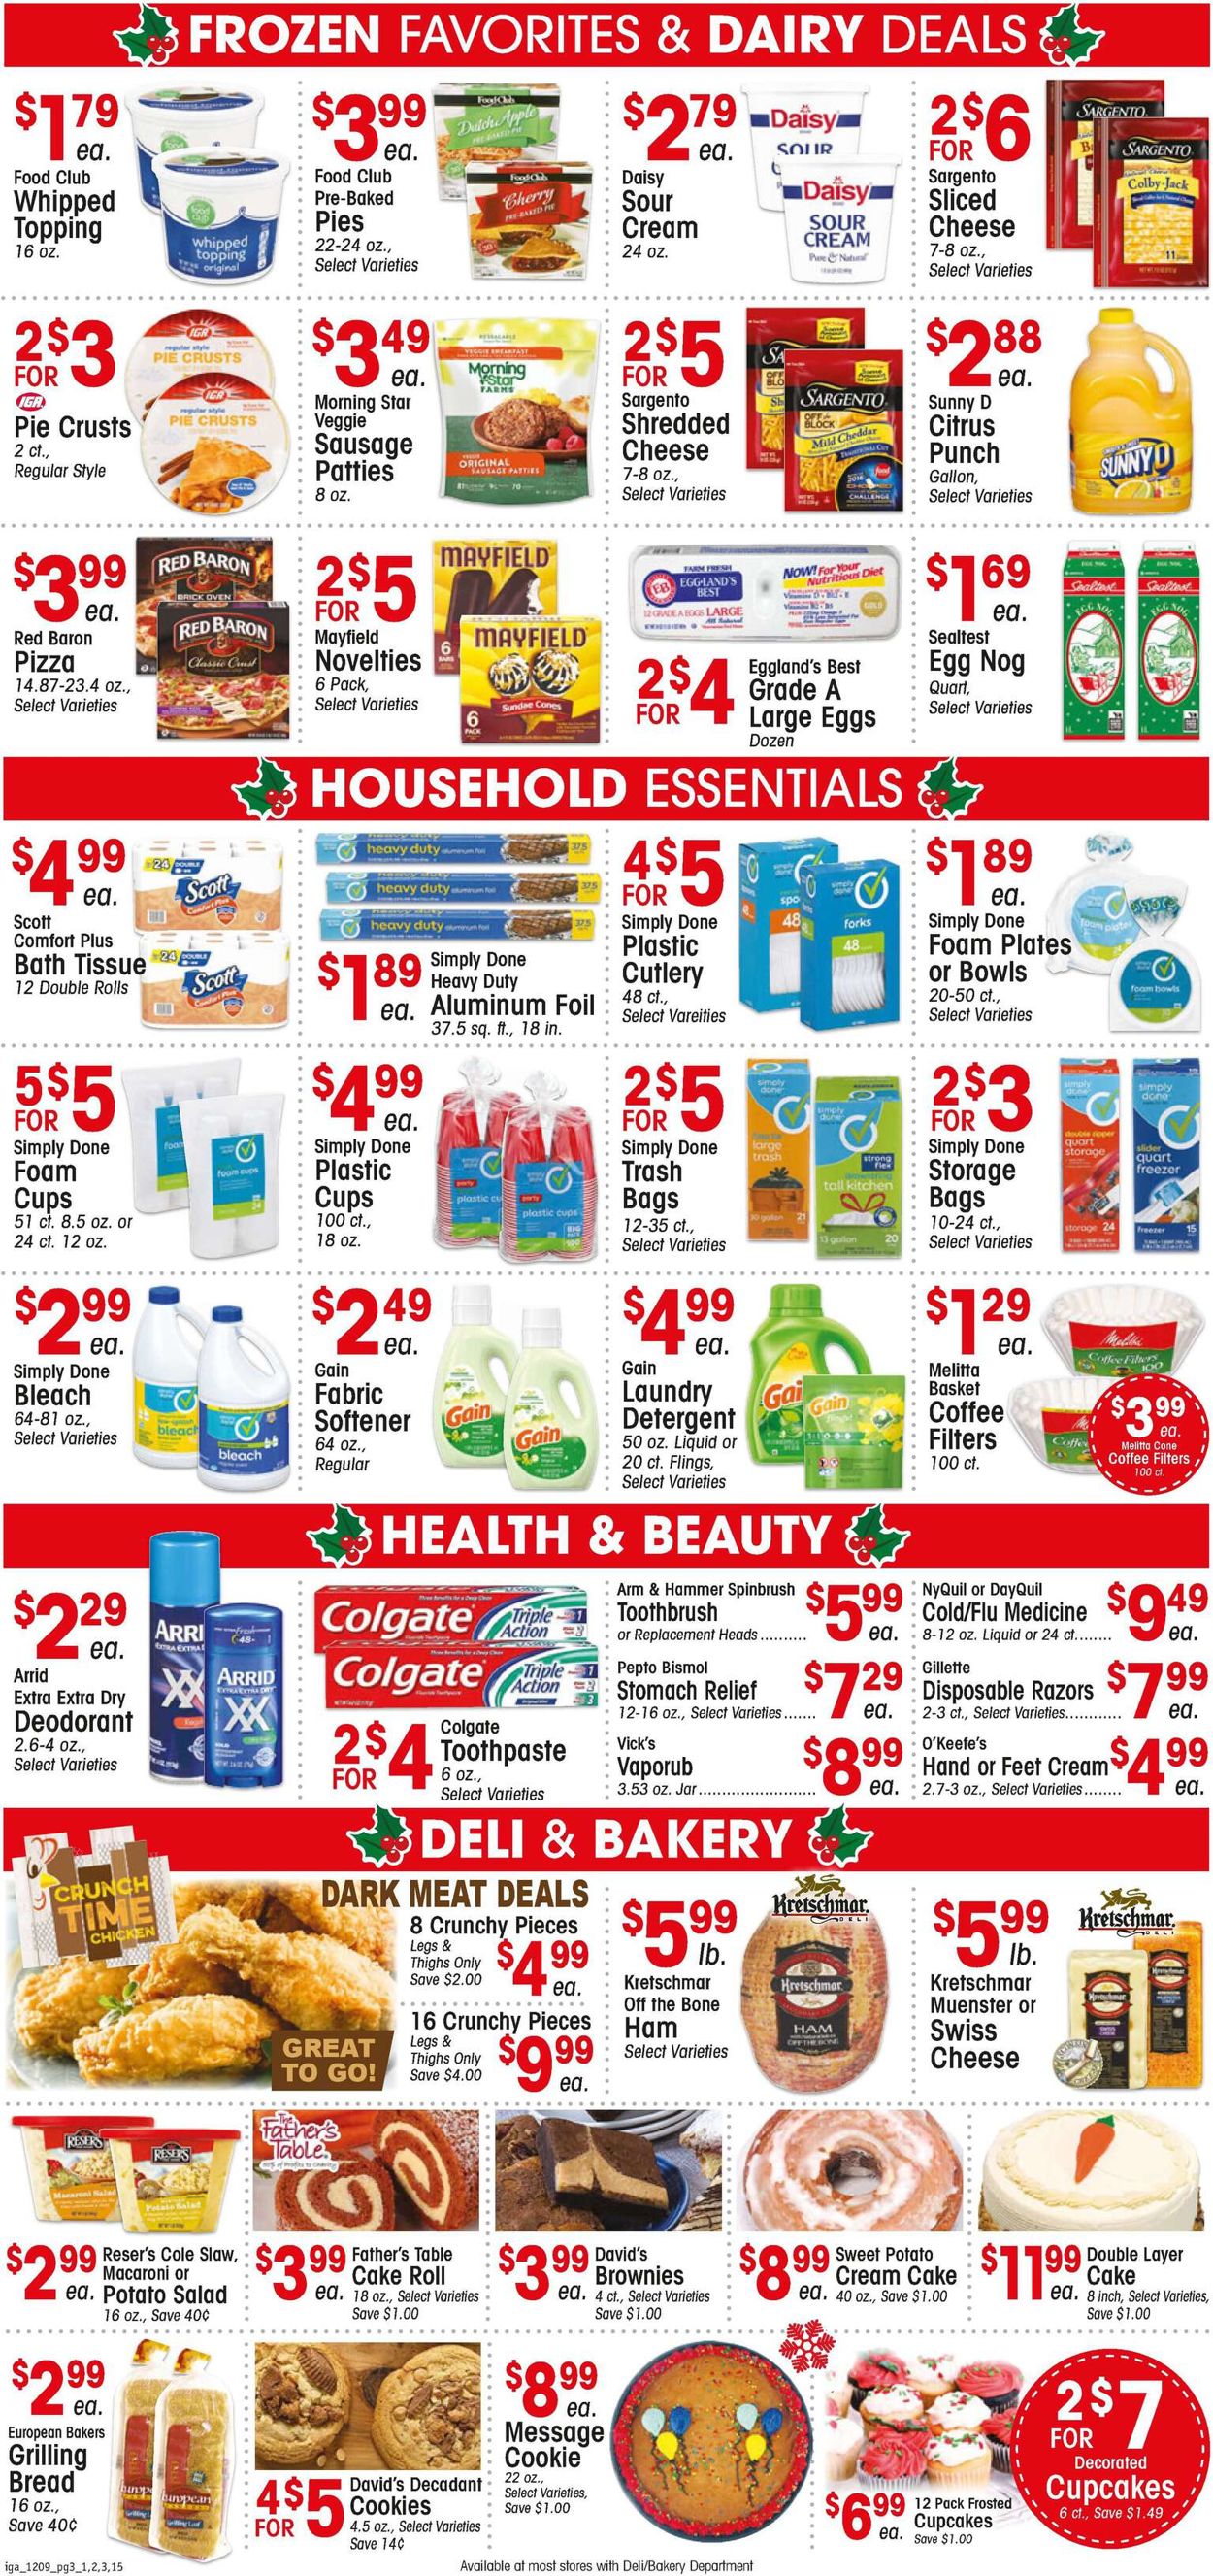 IGA Ad from 12/09/2020